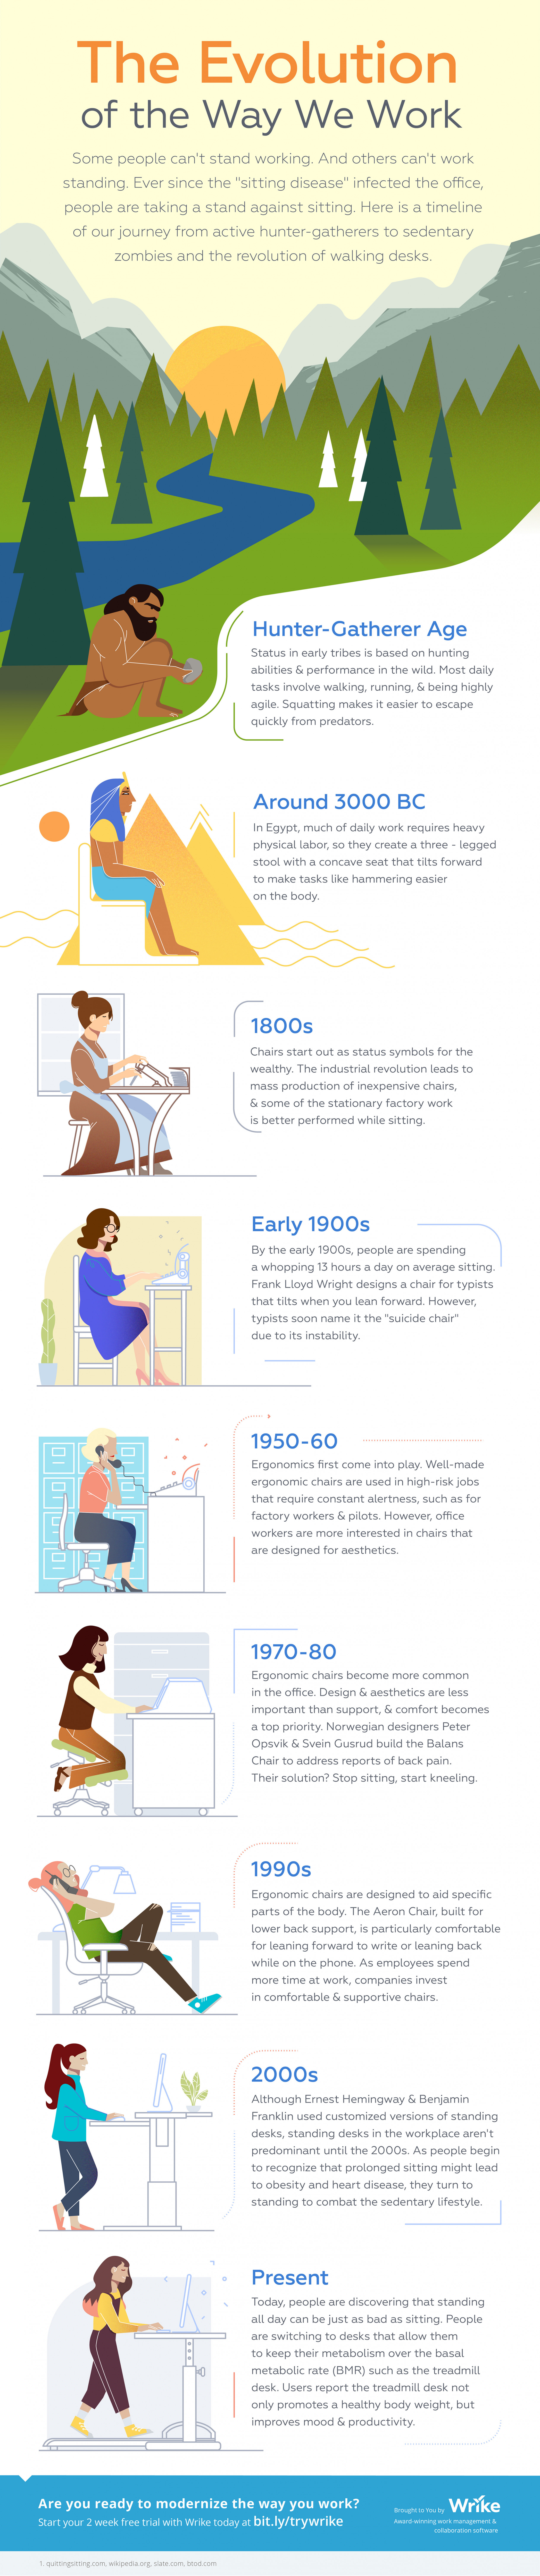 The Evolution of the Way We Work